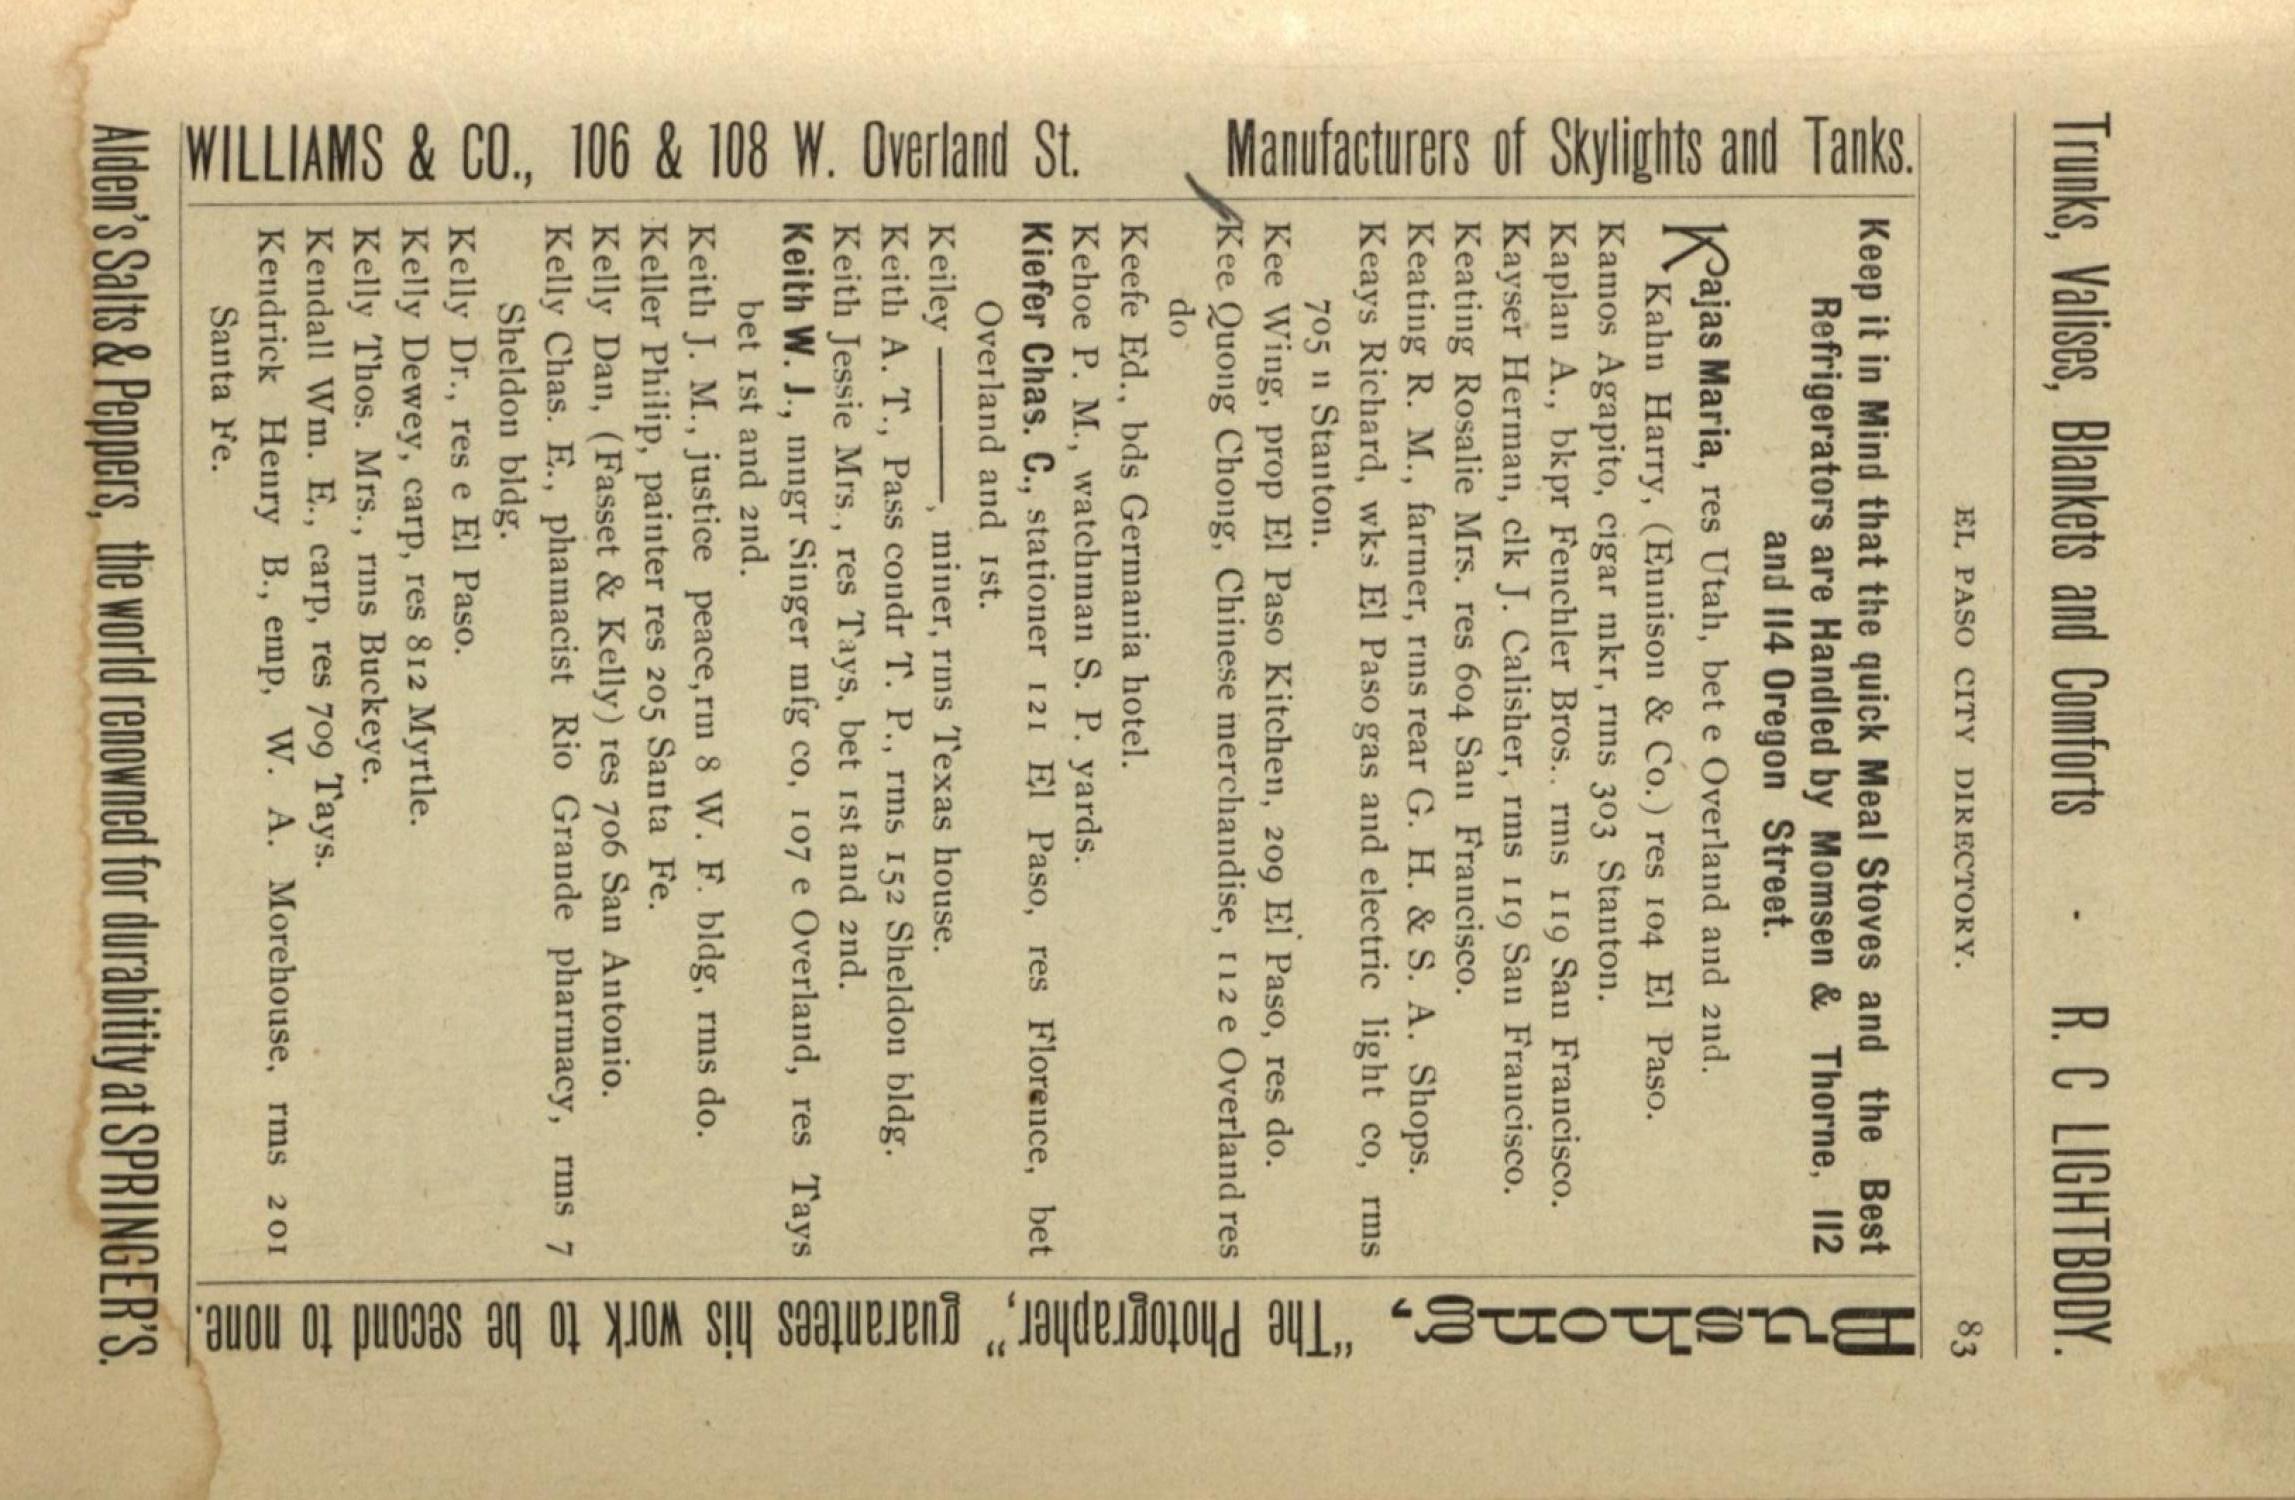 Classified Business Directory of the Cities of El Paso, Texas and Cuidad Juarez, Mexico for the years 1892 and 1893
                                                
                                                    83
                                                